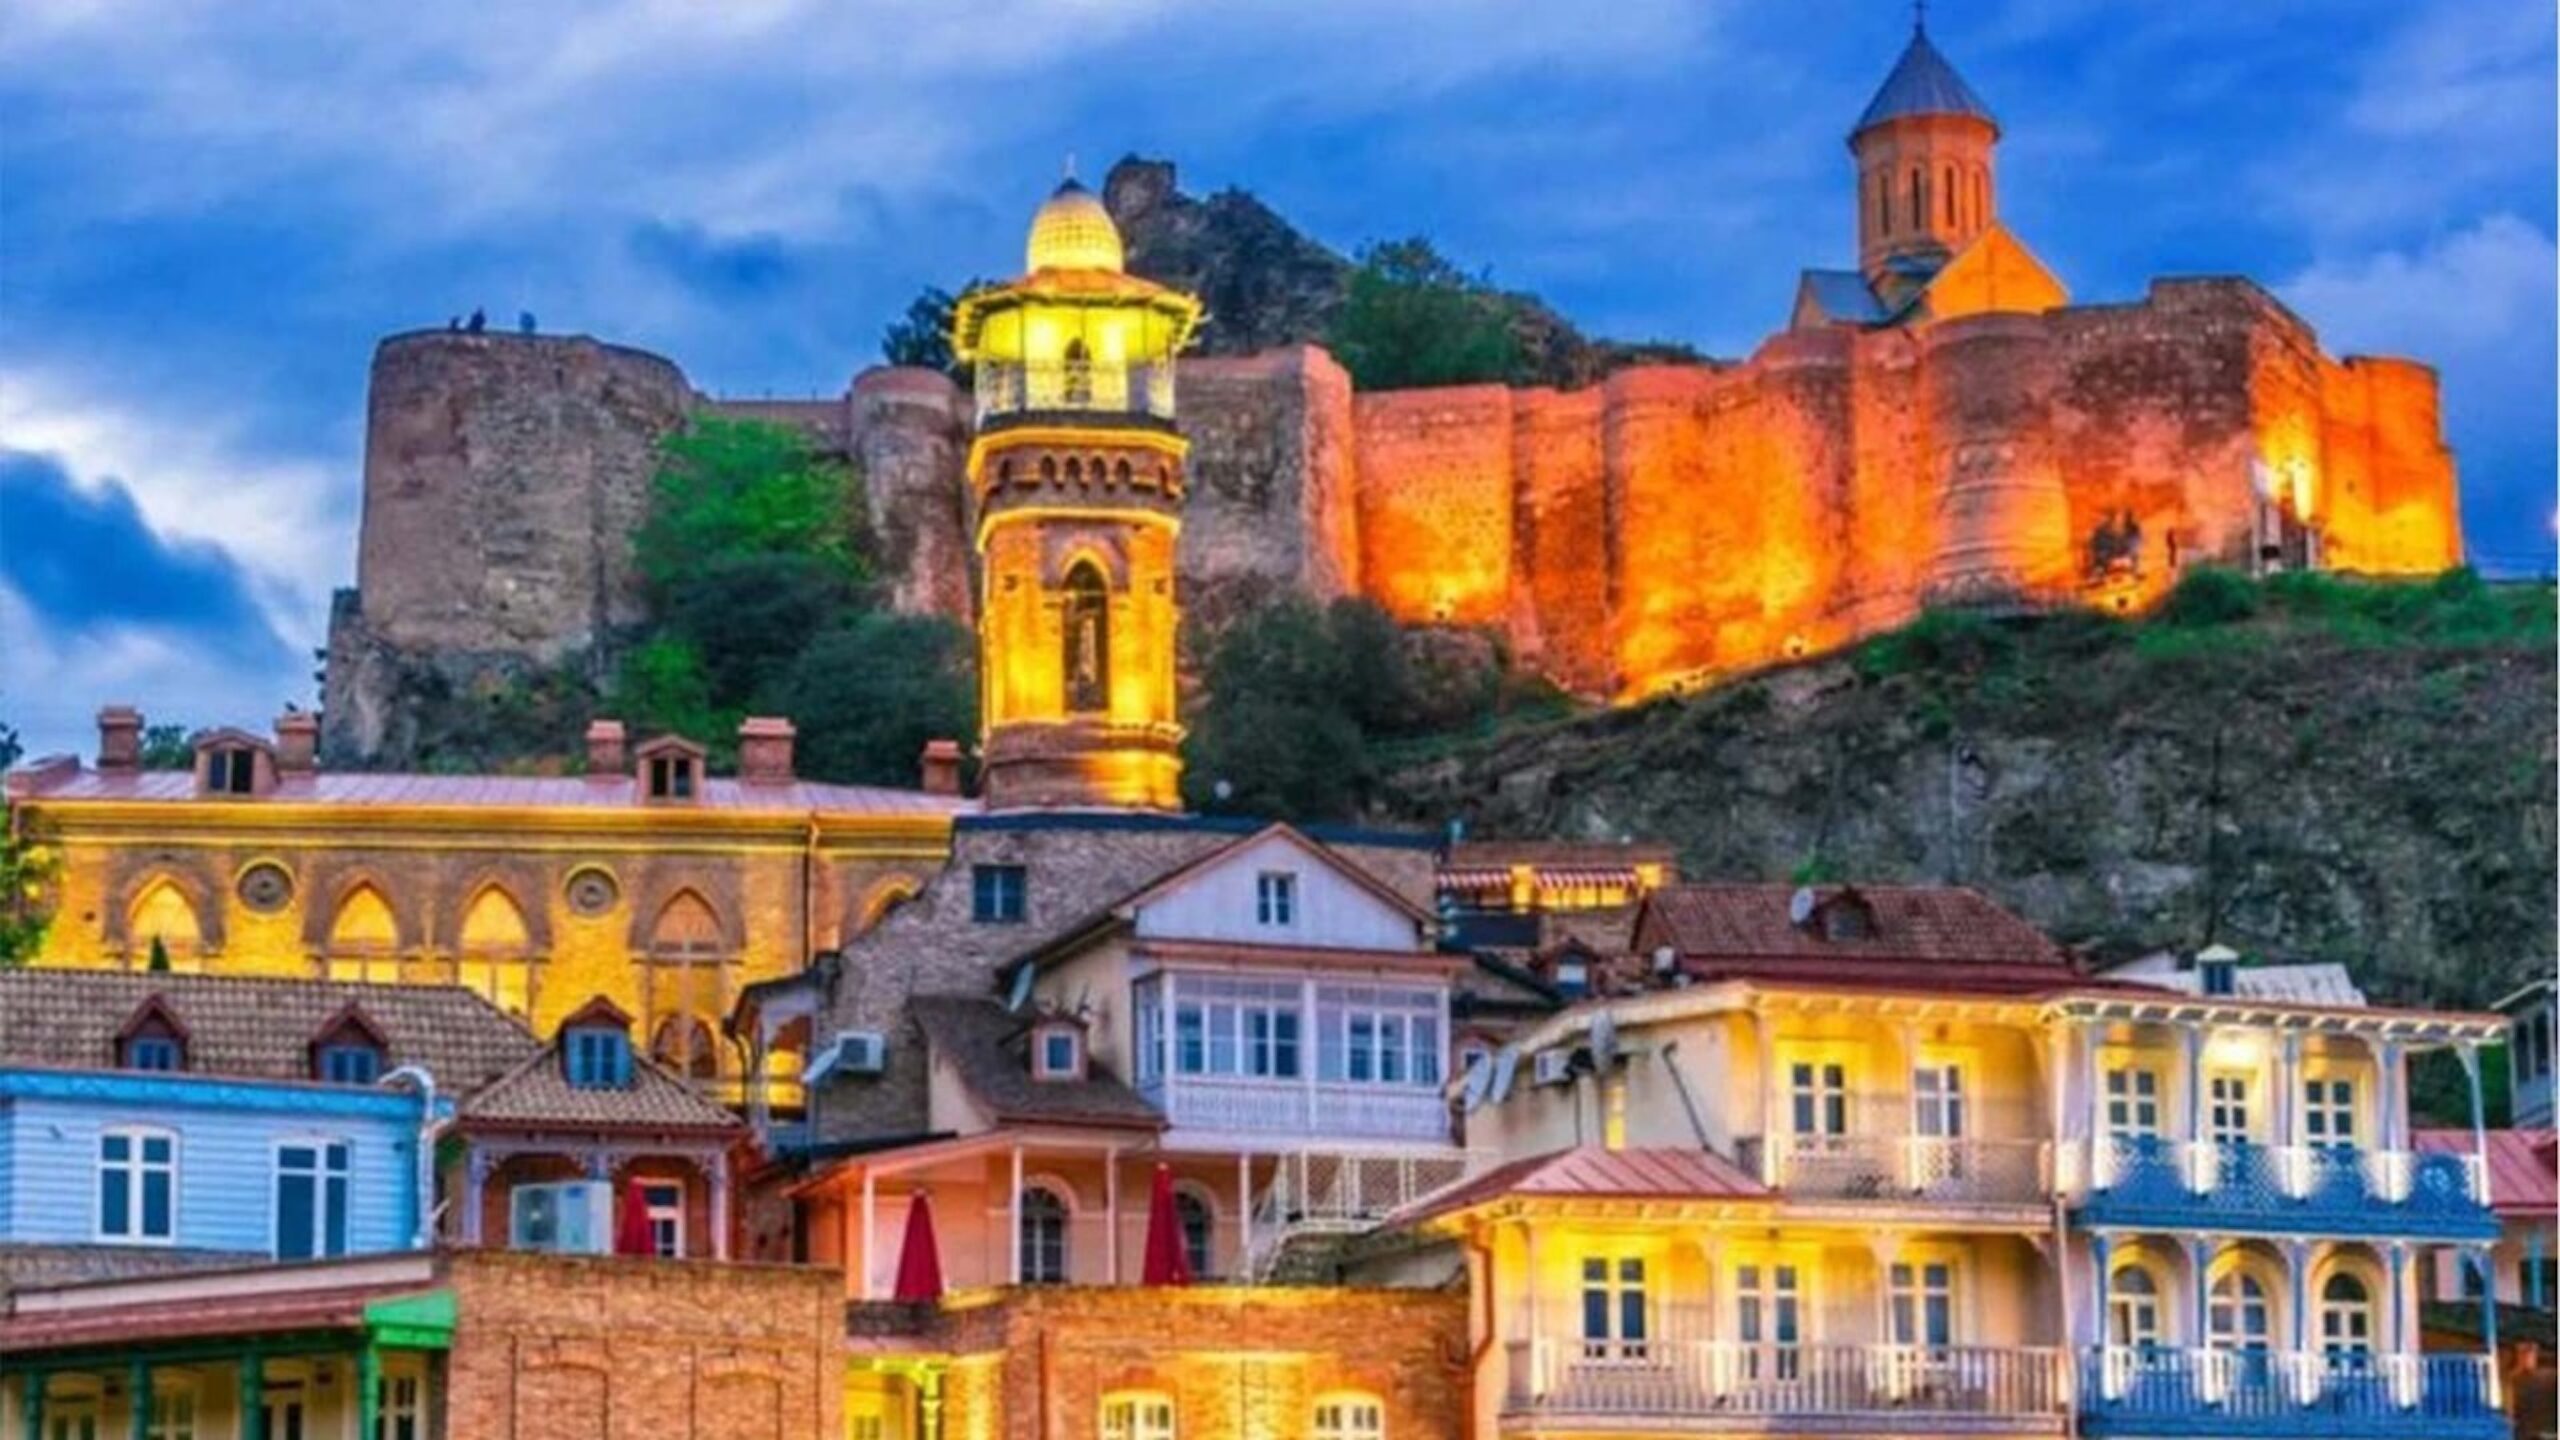 THE CAPITAL OF GEORGIA TBILISI BECKONS WITH ART & HISTORY! WHAT MAKES THE METROPOLIS ON THE RIVER KURA SO UNIQUE?